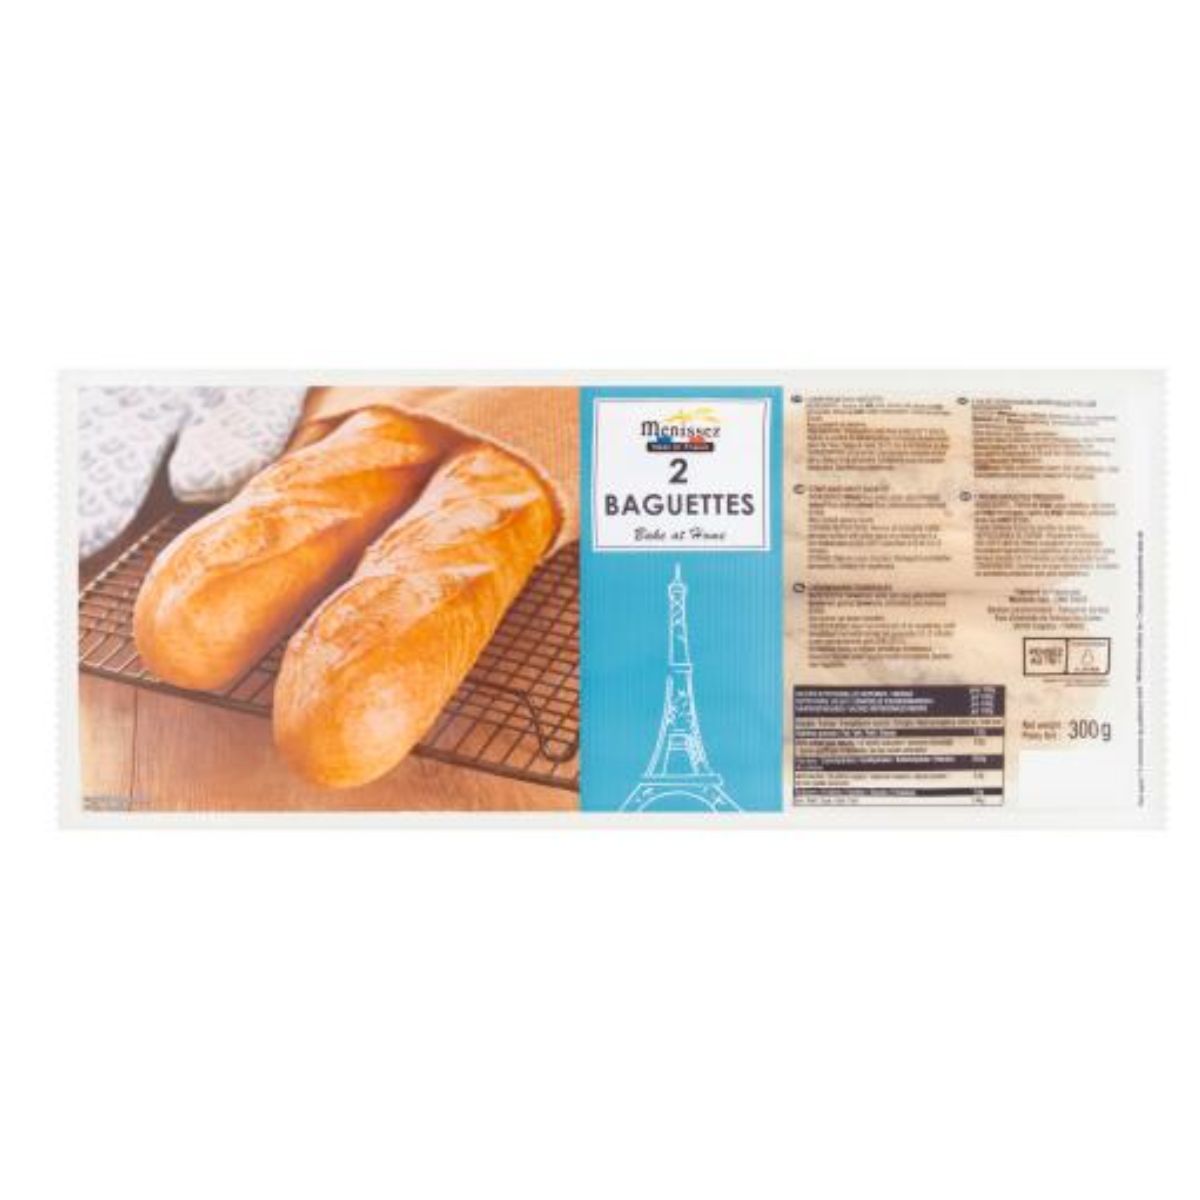 Packaging of Menissez 2 baguettes with a picture of baked baguettes and the eiffel tower on the label, showing nutritional information on the right.